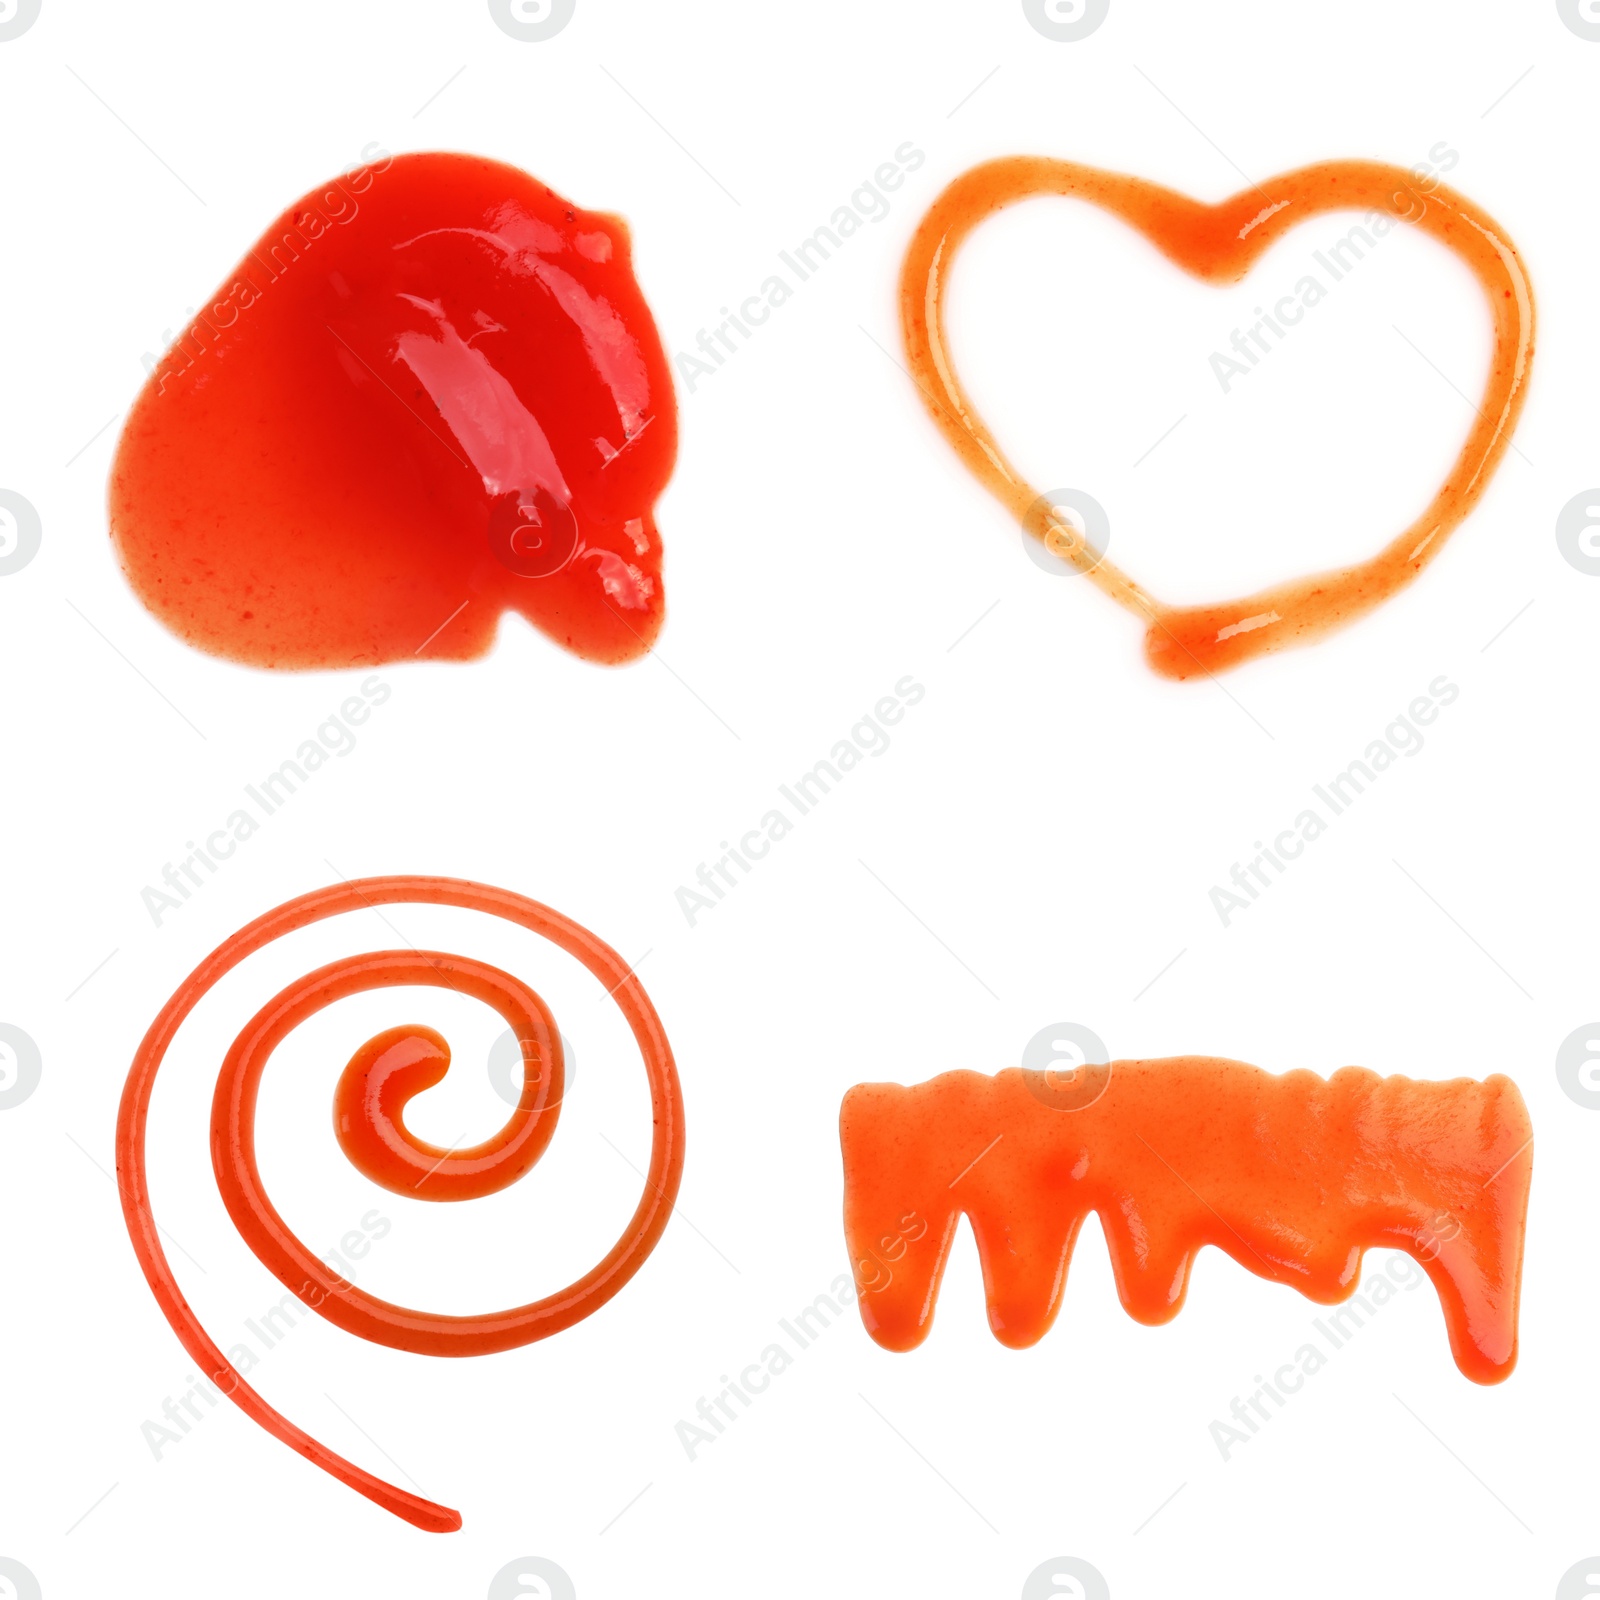 Image of Set of delicious tomato sauce on white background, top view